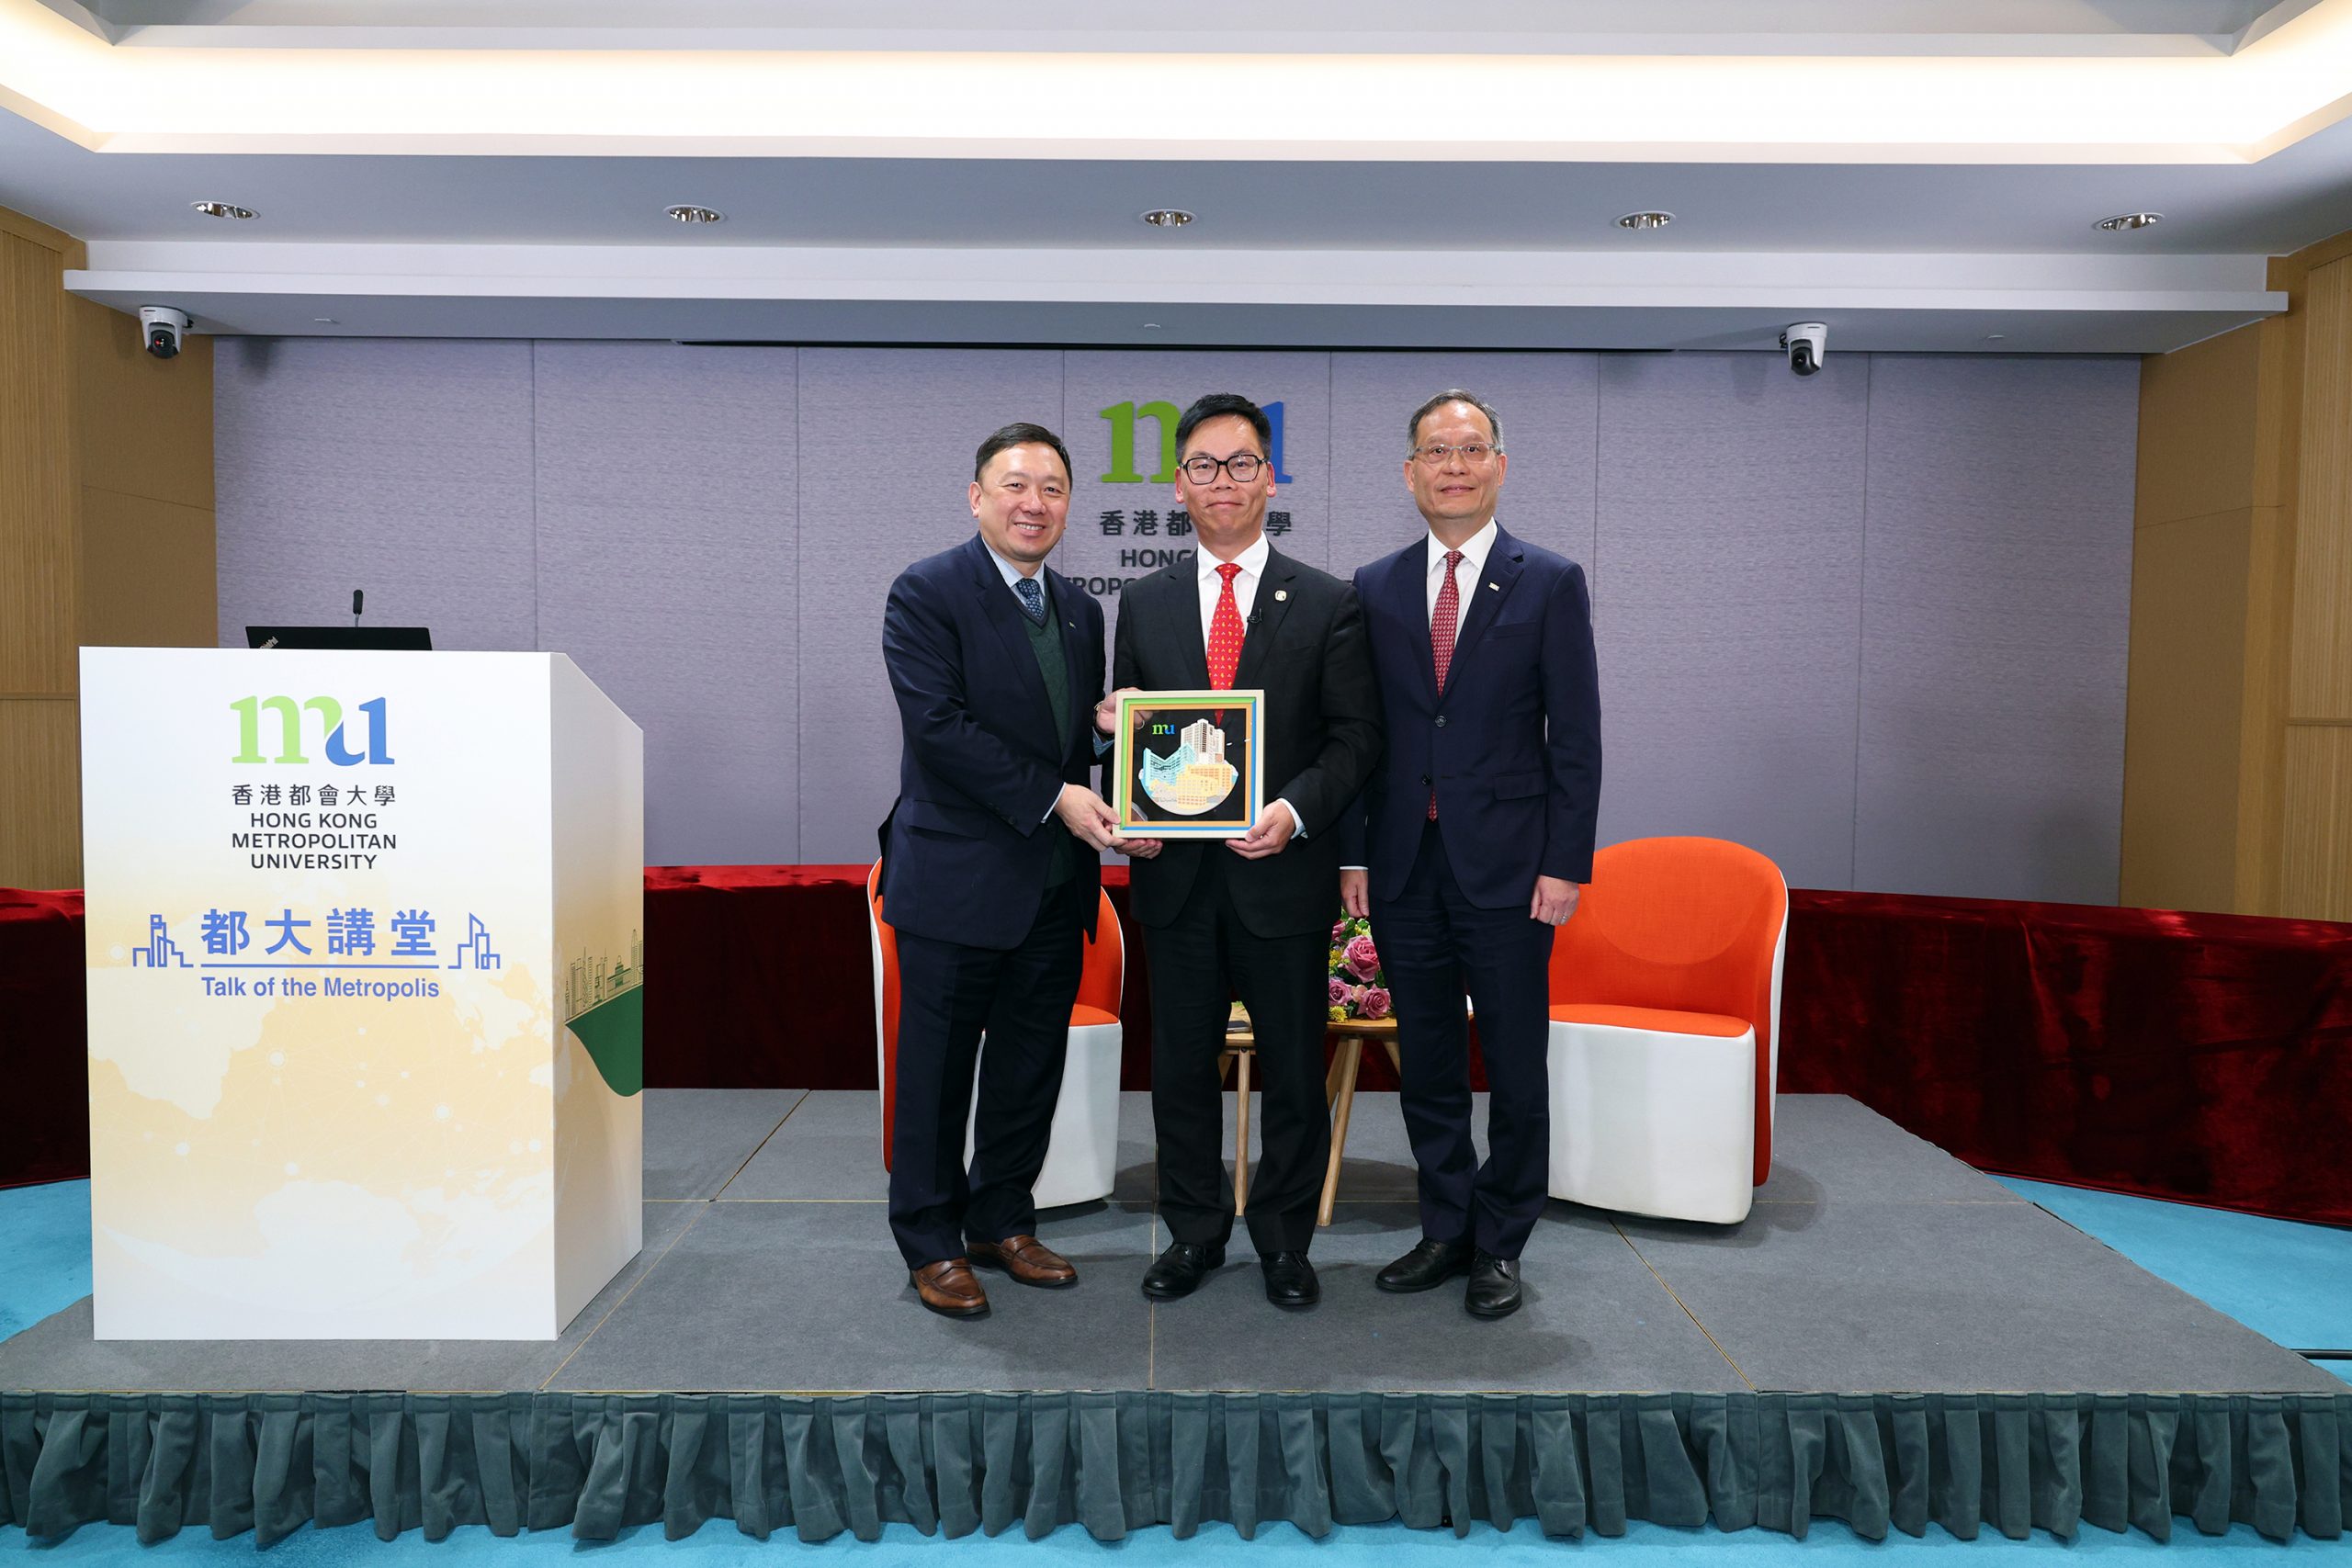 HKMU Council Chairman Ir Dr Conrad Wong Tin-cheung (left) and President Prof. Paul Lam Kwan-sing (right) present a souvenir to the President of the Hong Kong Institution of Engineers Ir Aaron Bok Kwok-ming.